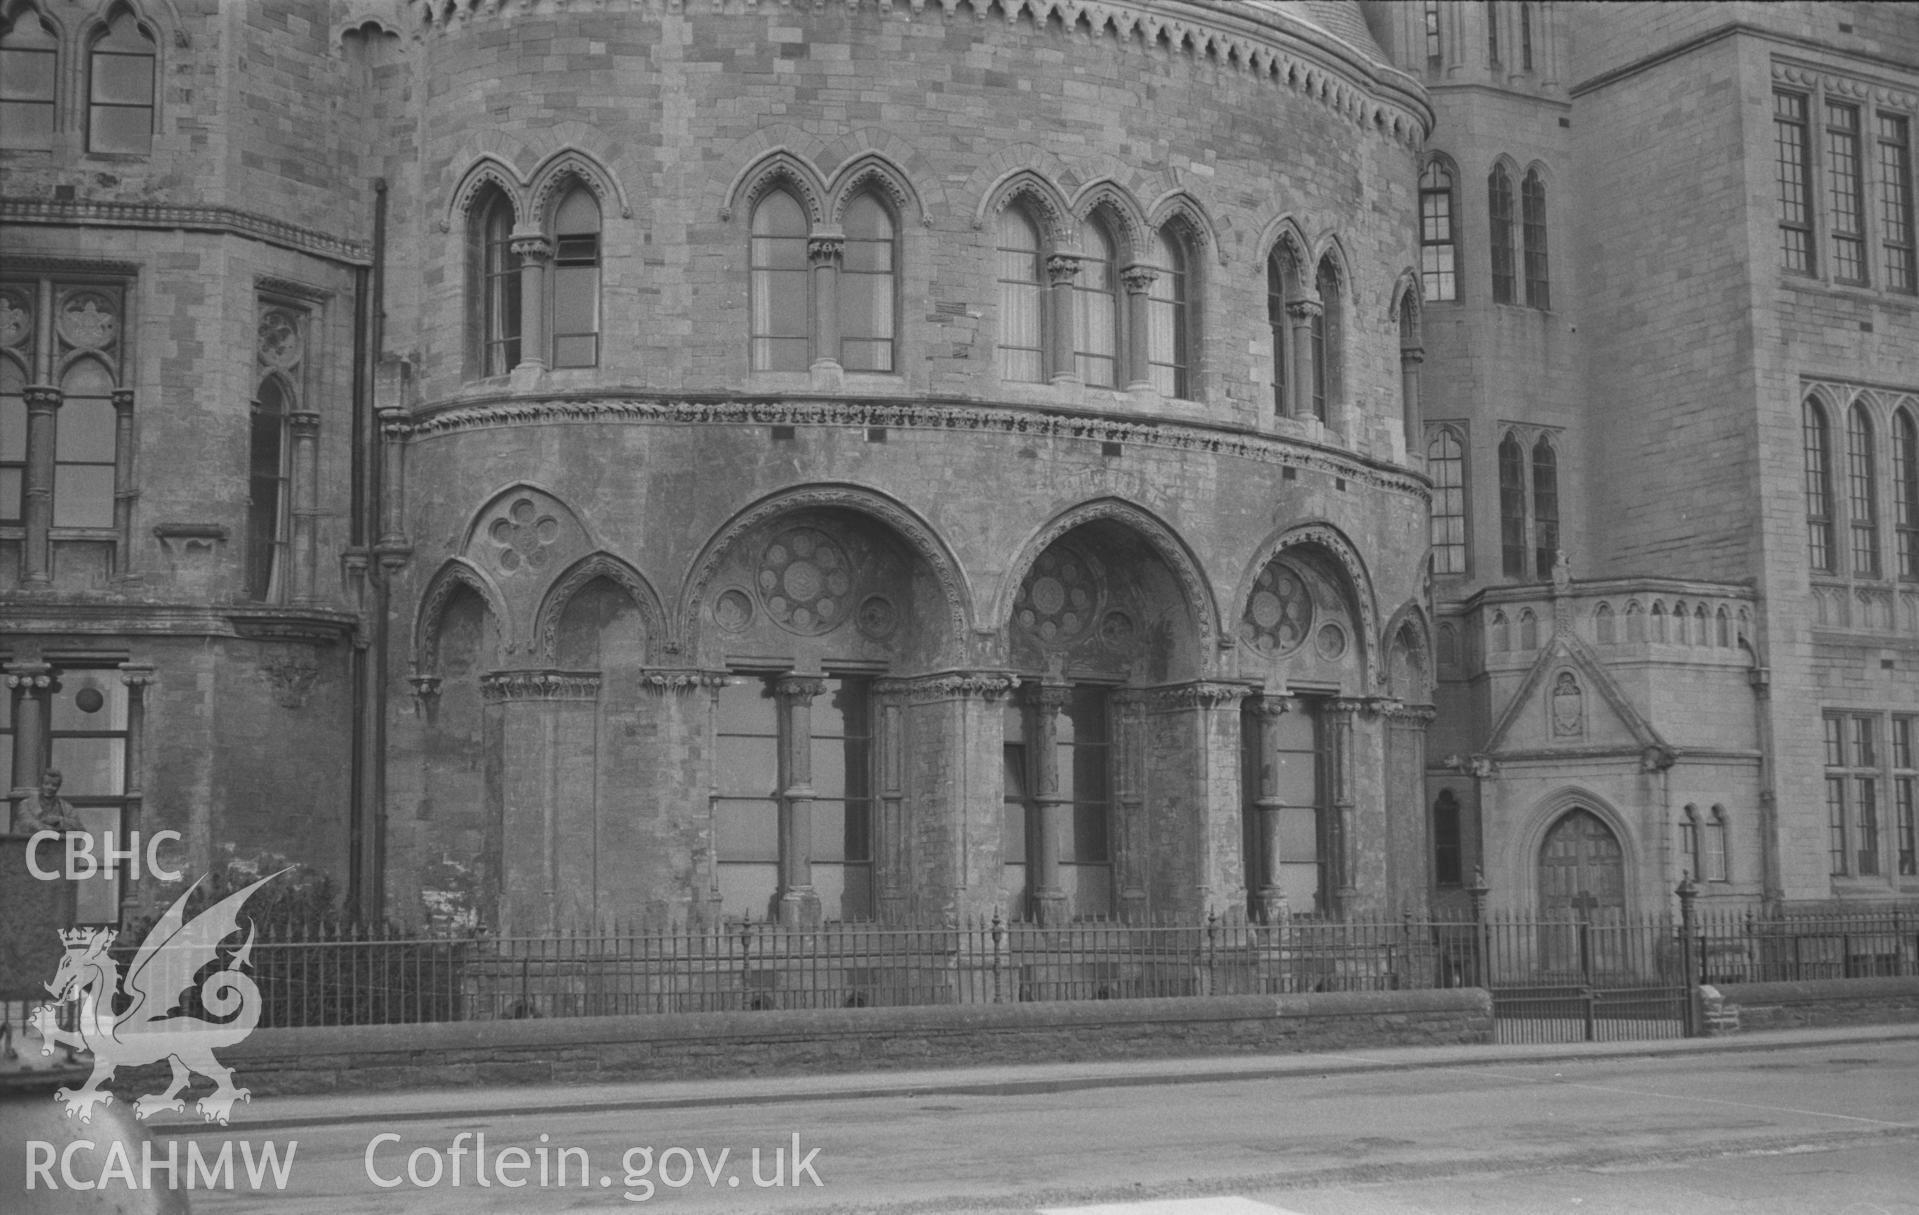 Black and White photograph showing the northwestern front of the Old College, Aberystwyth. Photographed by Arthur Chater in March 1961 from Grid Reference SN 5808 8176, looking south.